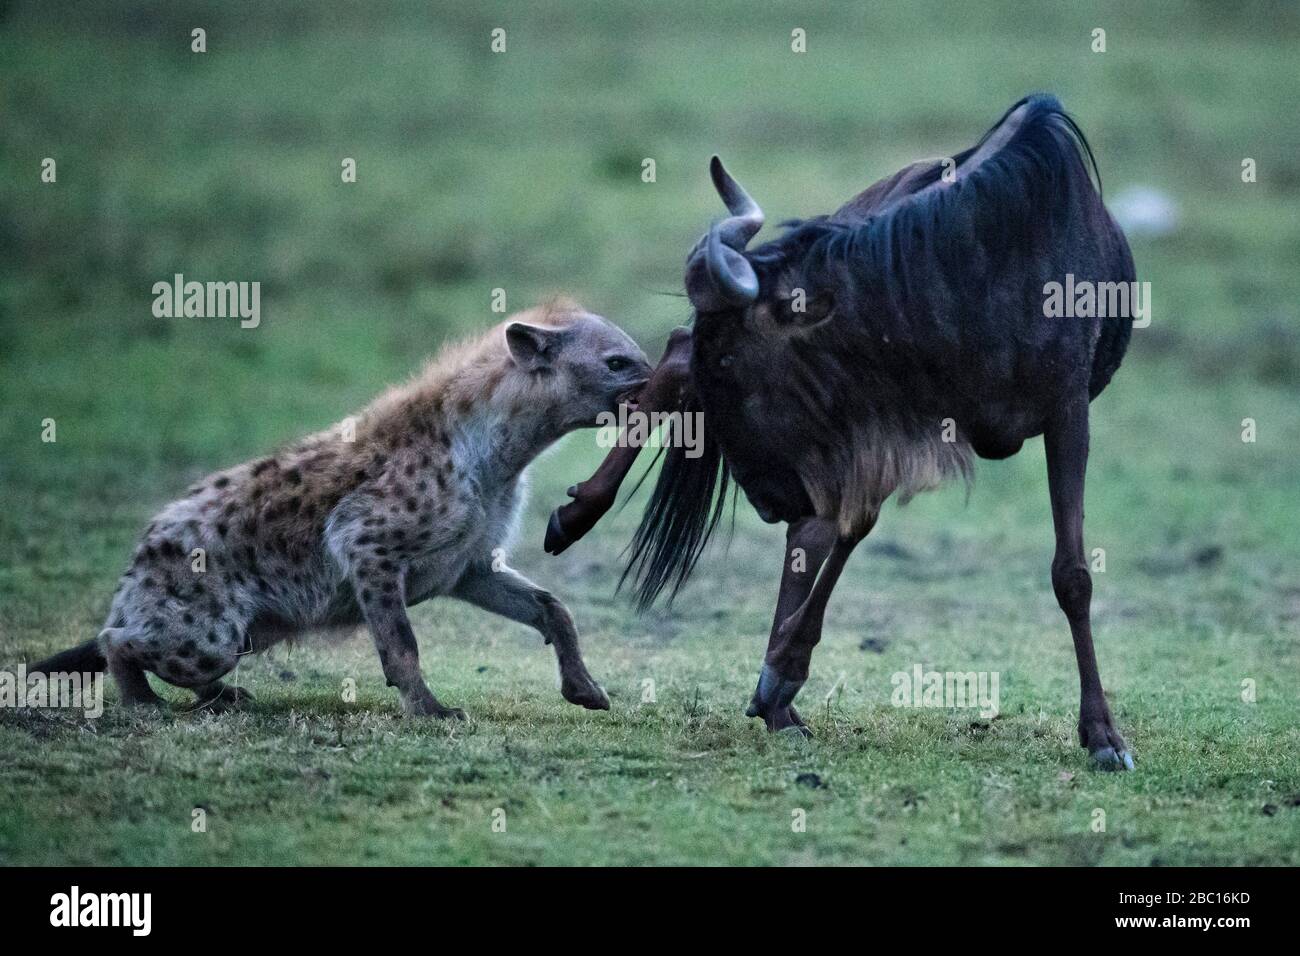 Safarigoers were stunned when a solitary hyena grabbed on to the leg of a huge wildebeest. KENYA: PHOTOGRAPHER captures the animal kingdom?s David and Stock Photo